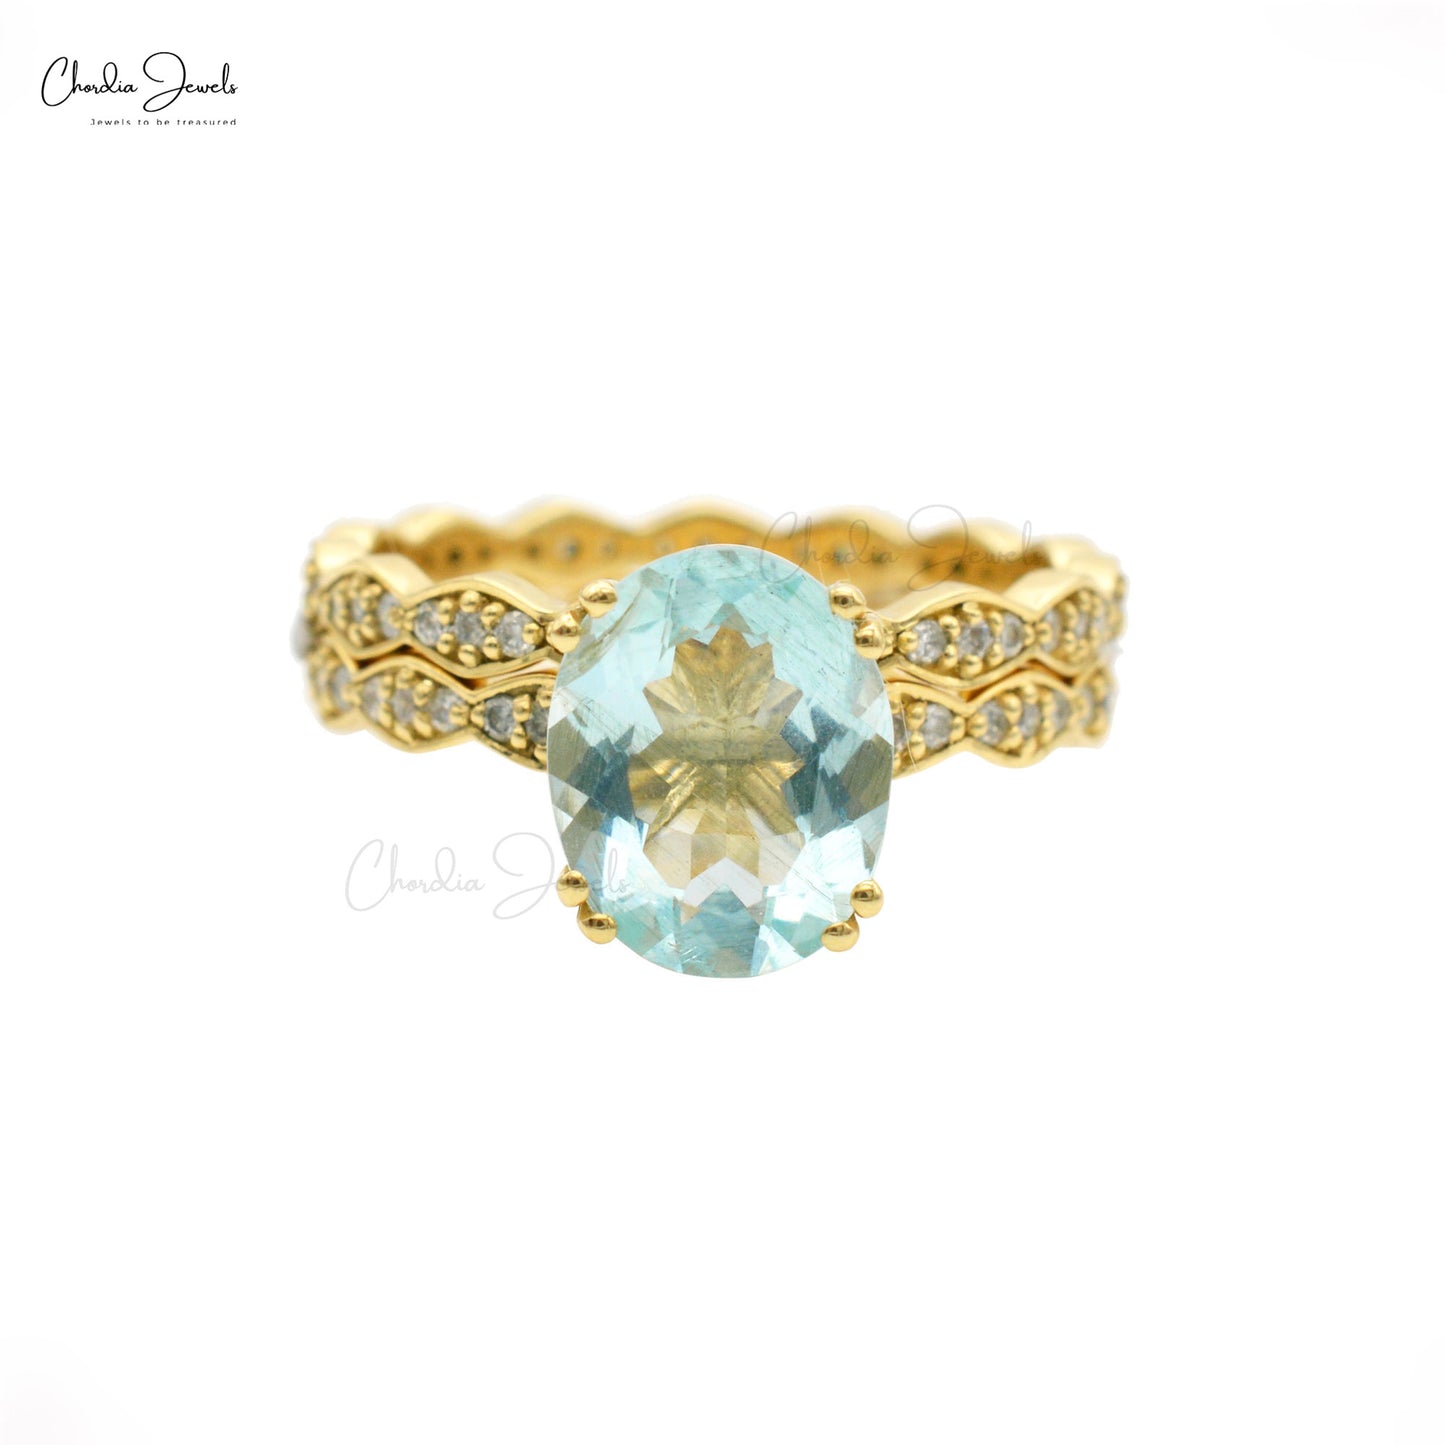 Load image into Gallery viewer, Vintage Gorgeous Natural Aquamarine Statement Ring 1.92 Ct Gemstone Stackable Ring 14k Solid Gold White Diamond Wedding Band Hallmarked Jewelry For Valentine
